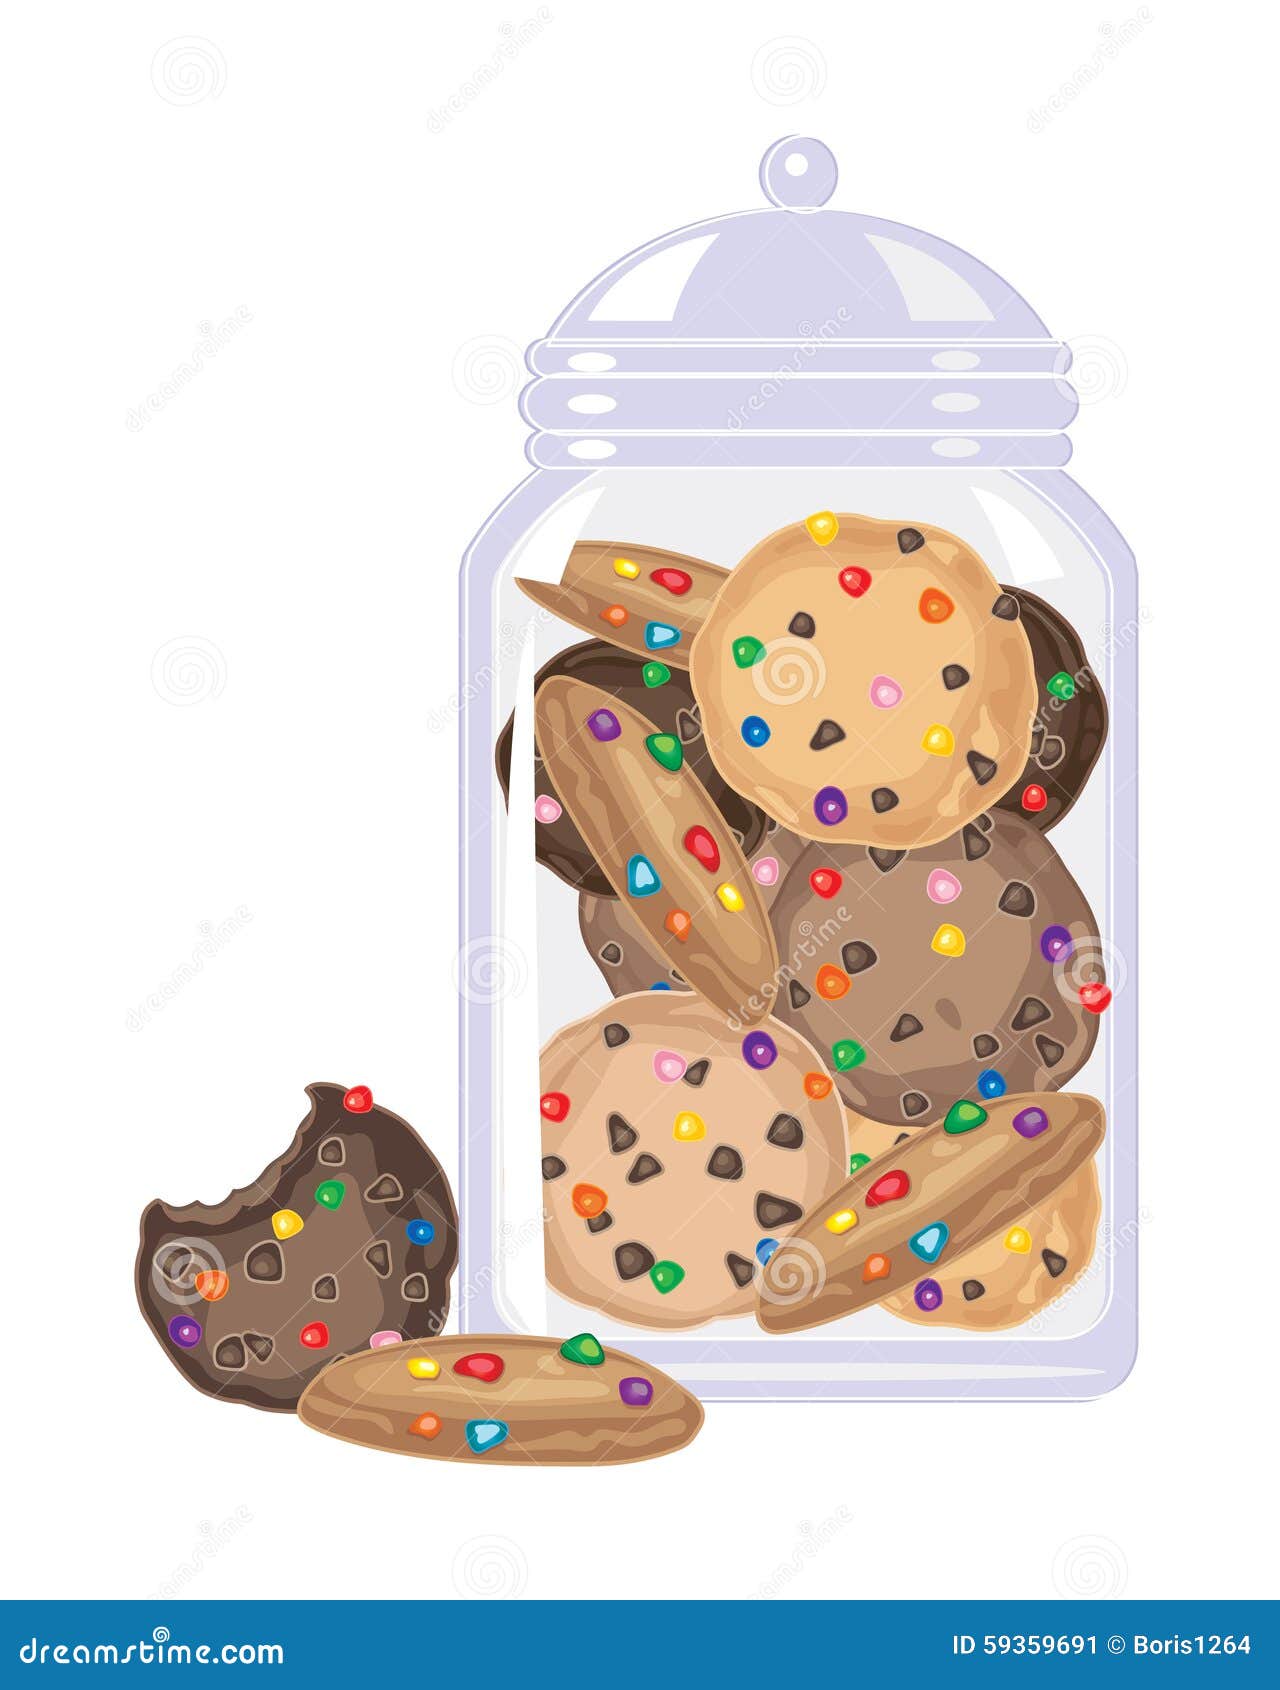 https://thumbs.dreamstime.com/z/candy-cookies-jar-illustration-crunchy-colorful-pieces-glass-white-background-59359691.jpg